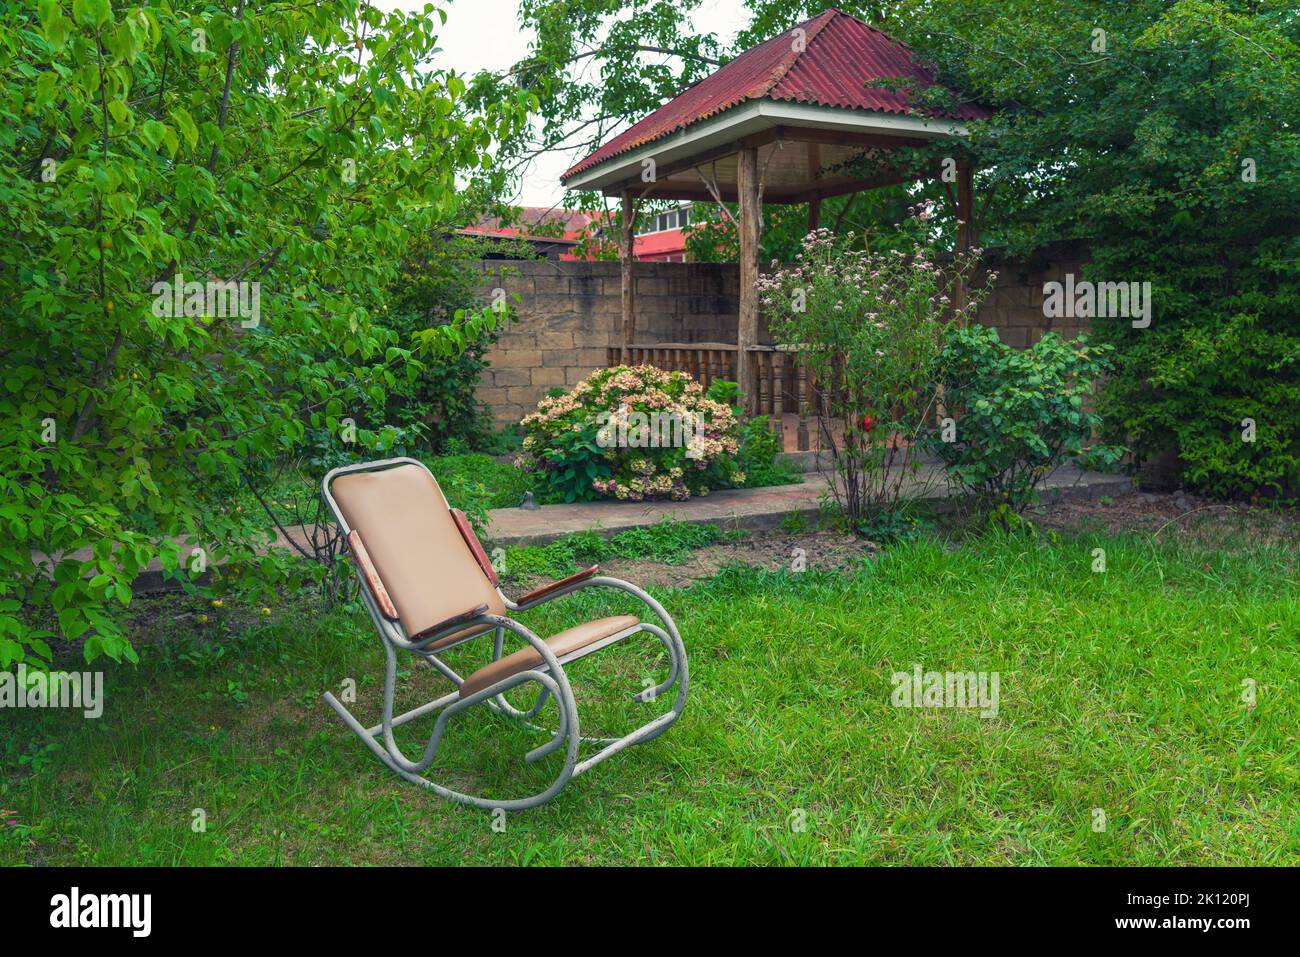 Rocking chair in the garden of a country house Stock Photo